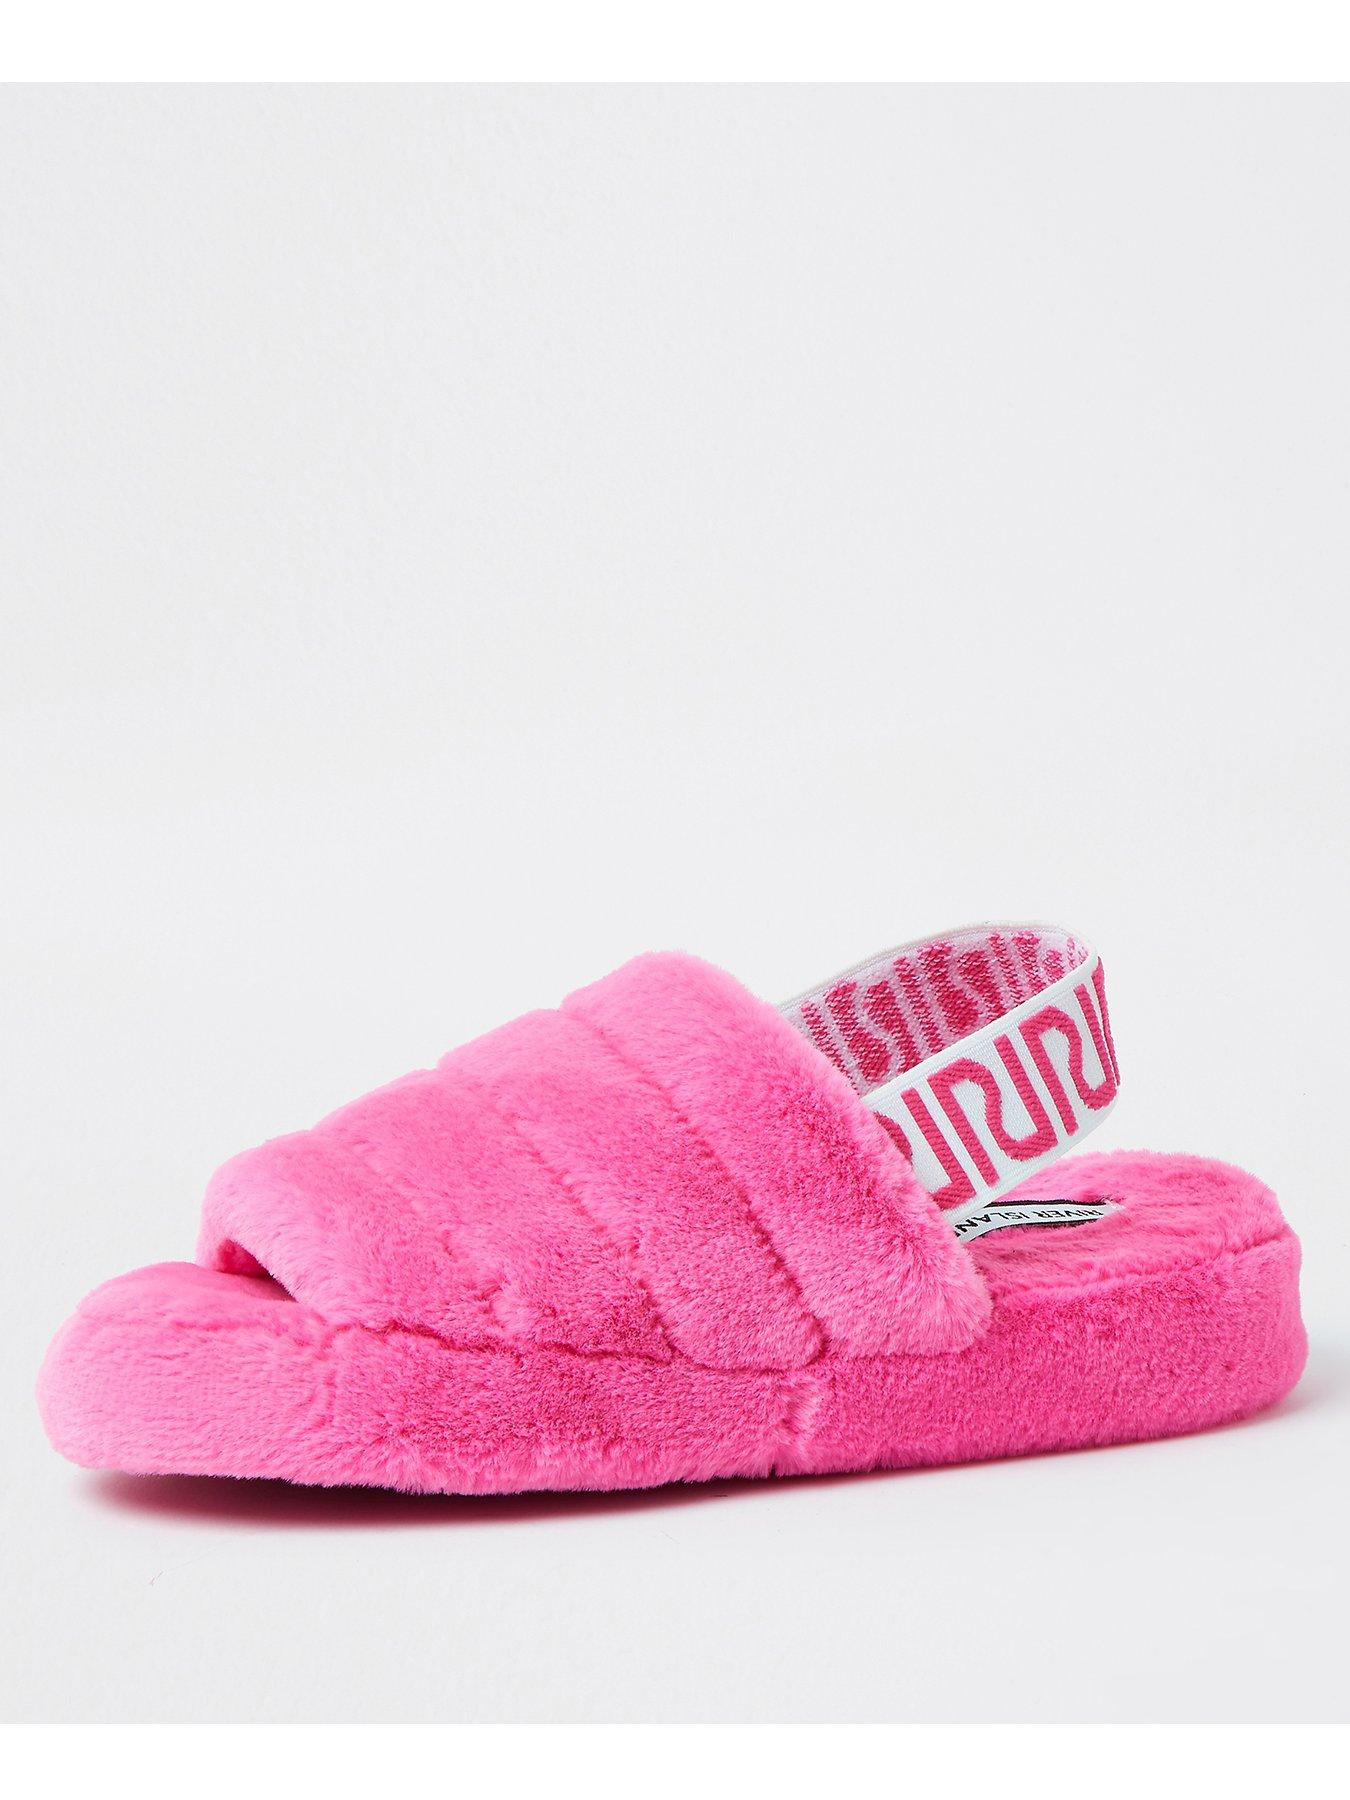 bright pink fluffy slippers